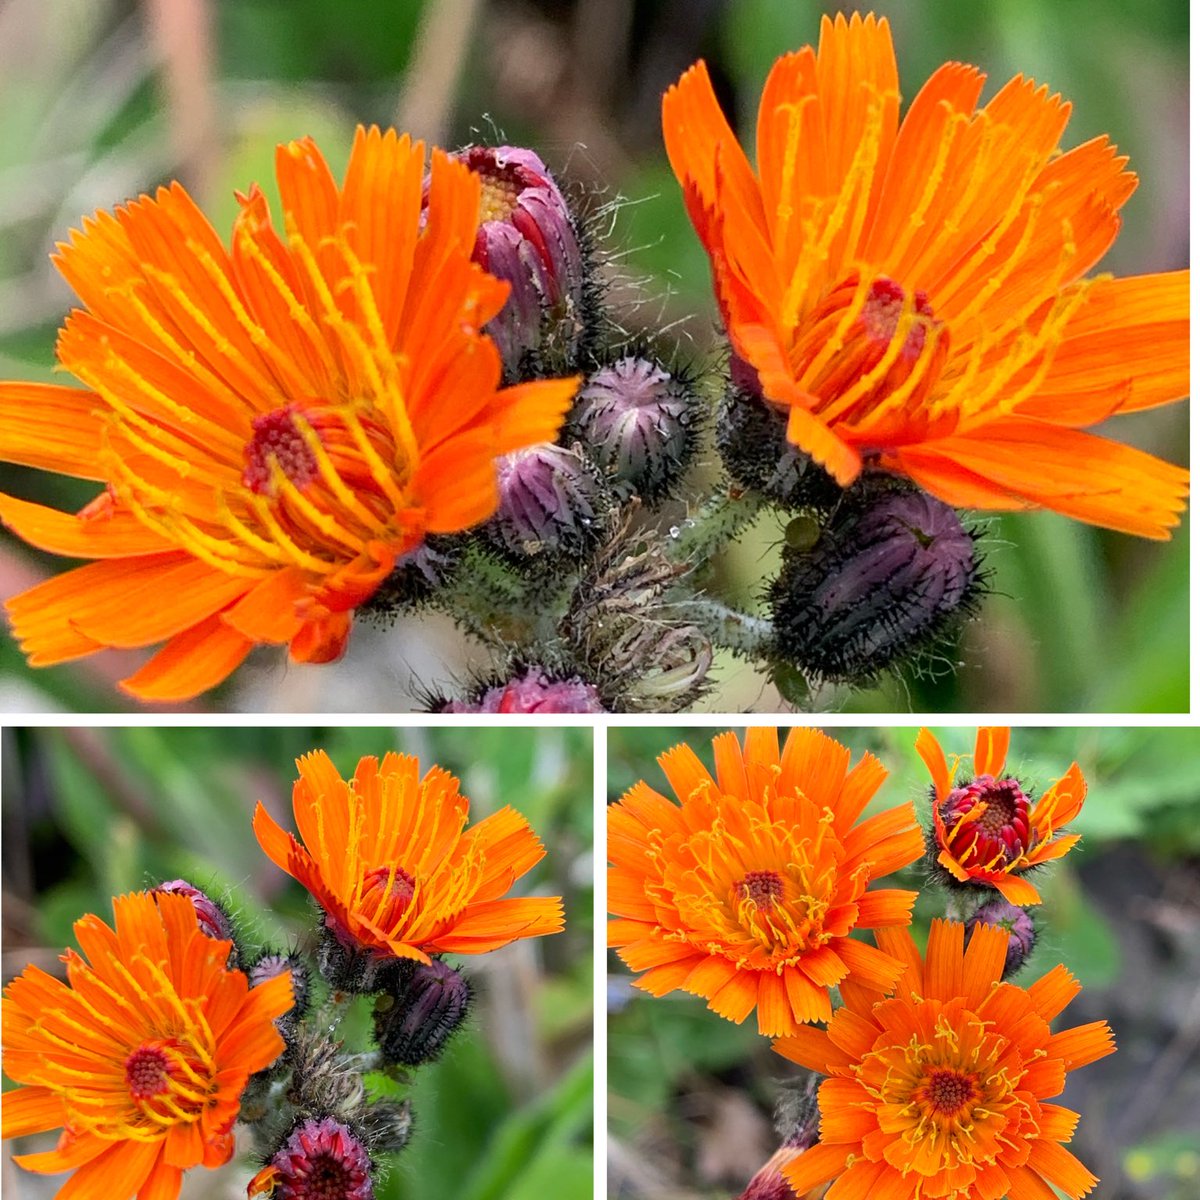 Some standout Fox-and-Cubs (Pilosella aurantiaca) #Cumbria #daisyfamily #wildflowerhour ⁦@BSBIbotany⁩